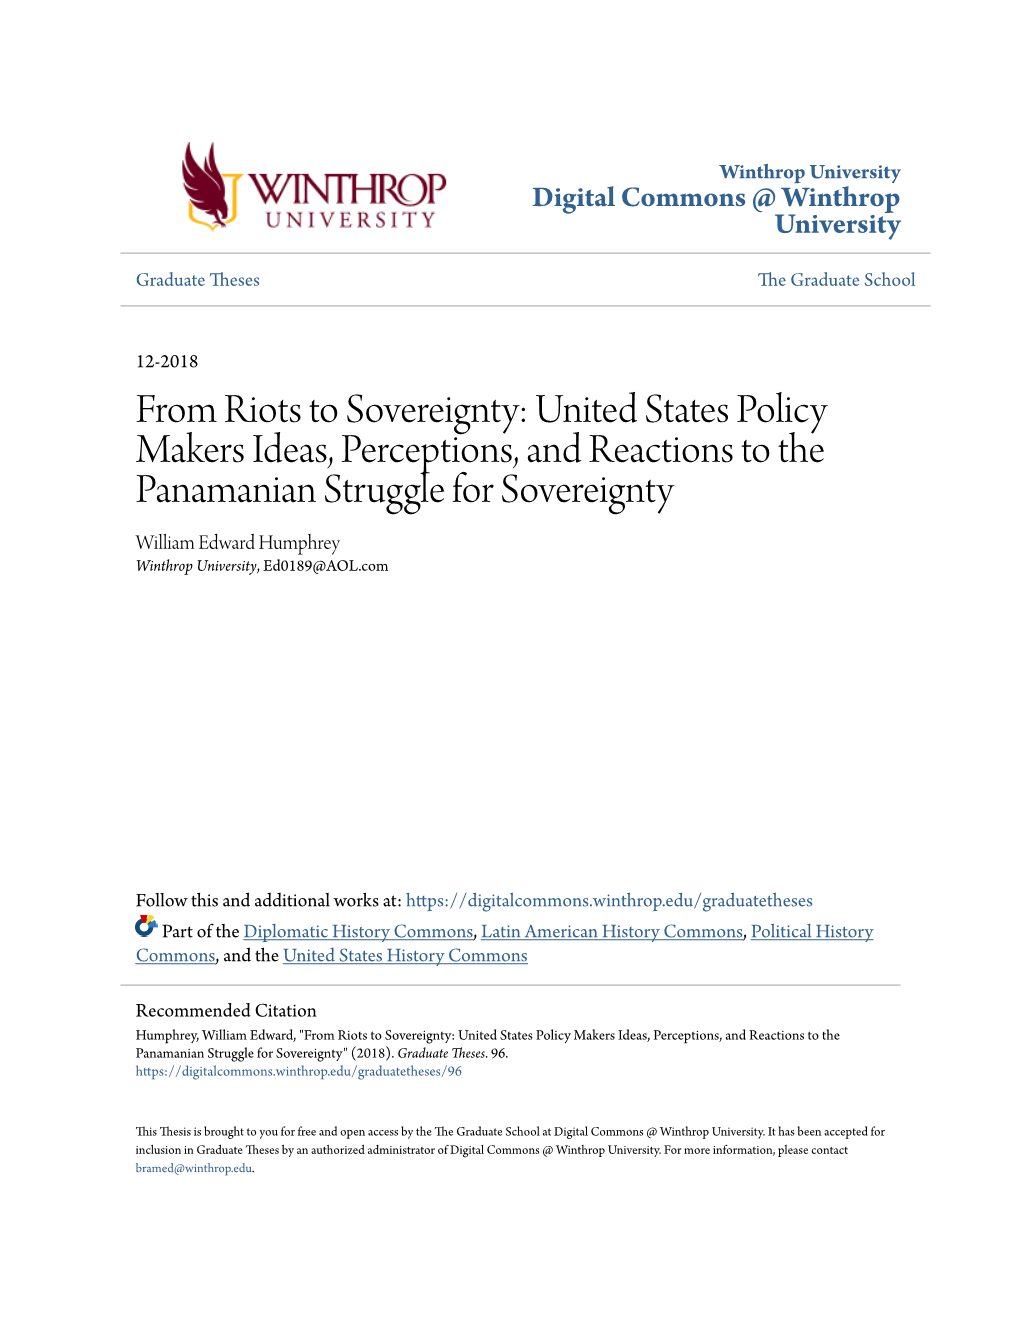 From Riots to Sovereignty: United States Policy Makers Ideas, Perceptions, and Reactions to the Panamanian Struggle for Sovereig